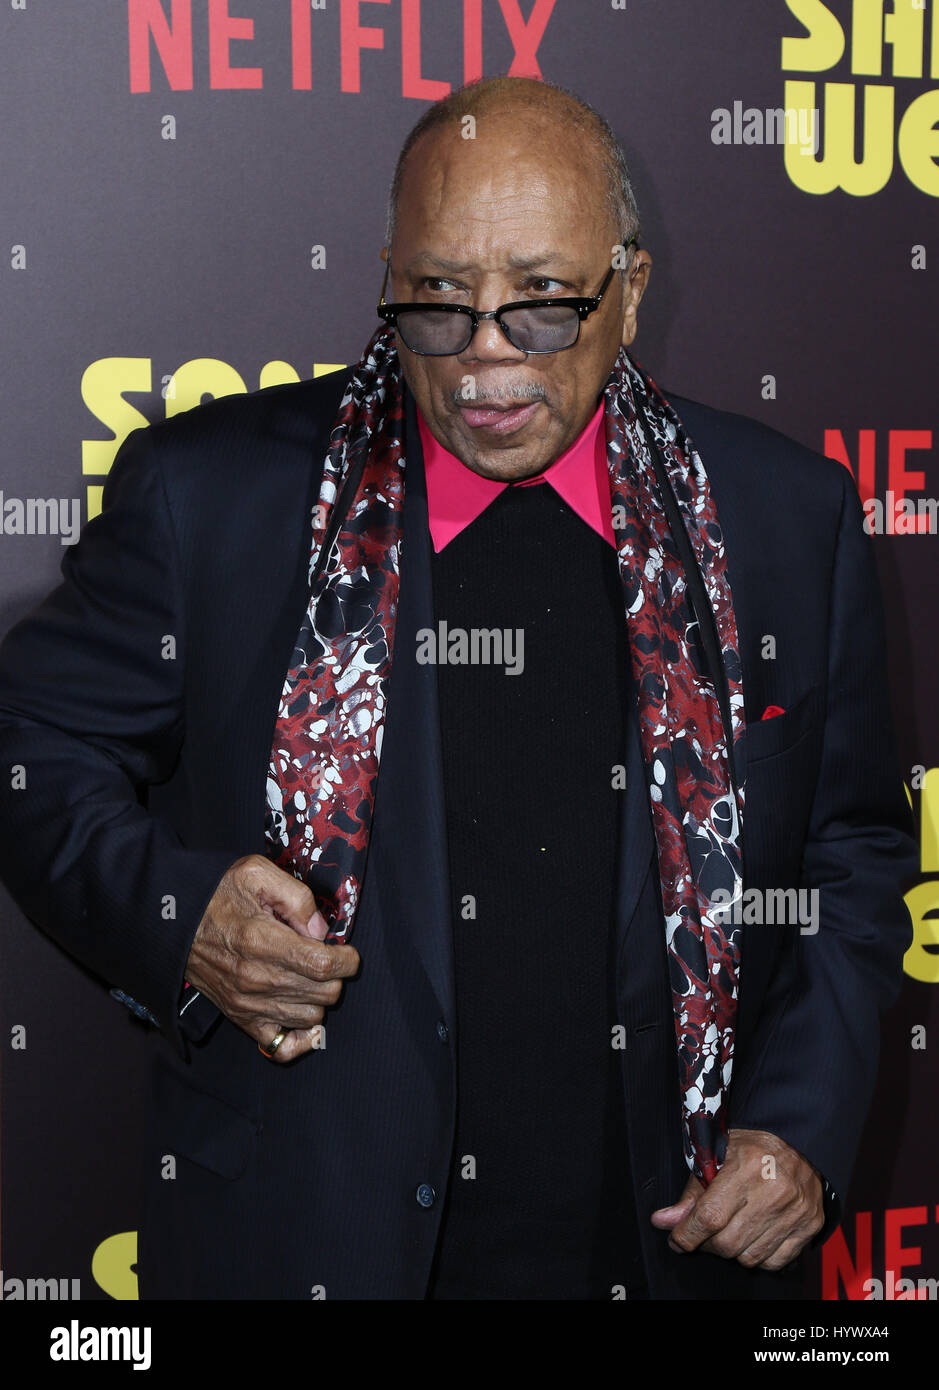 Hollywood, USA. 06th Apr, 2017. Quincy Jones, at Premiere of Netflix's 'Sandy Wexler at The ArcLight Cinemas Cinerama Dome in California on April 06, 2017. Credit: Fs/Media Punch/Alamy Live News Stock Photo